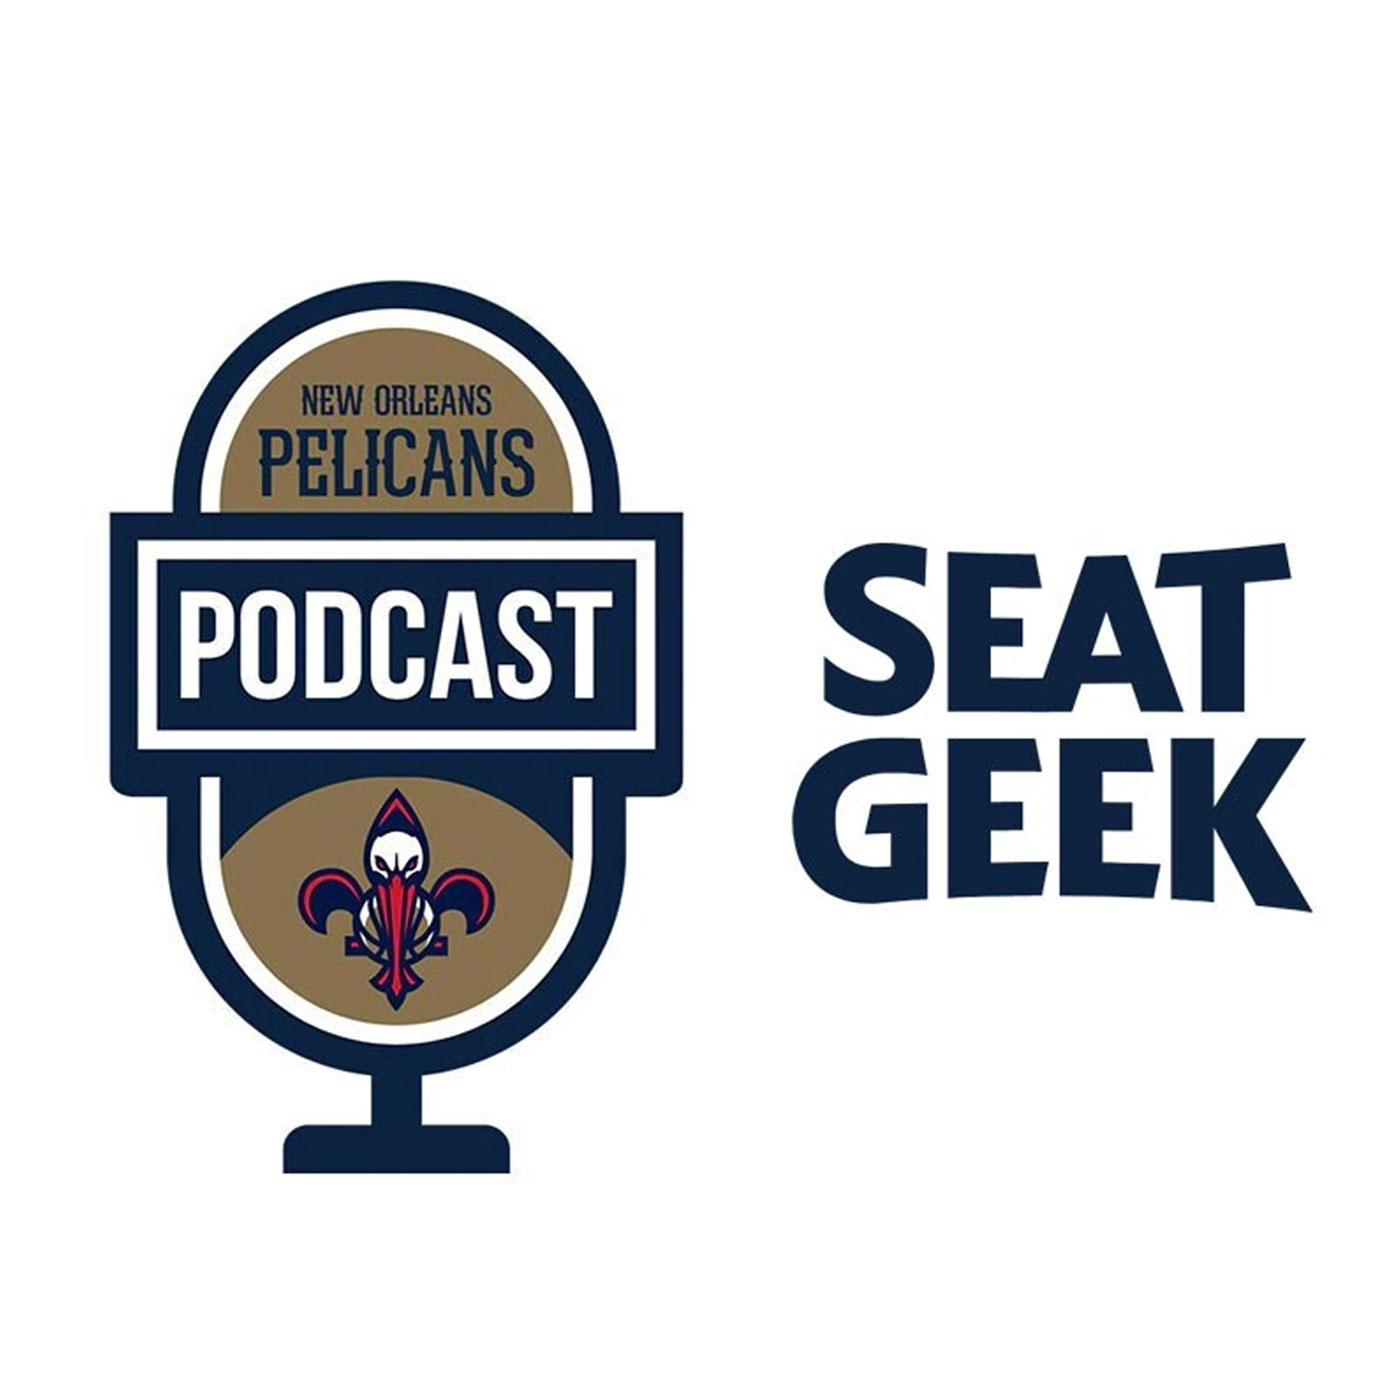 Marc Spears on the New Orleans Pelicans Podcast presented by SeatGeek - April 30, 2021